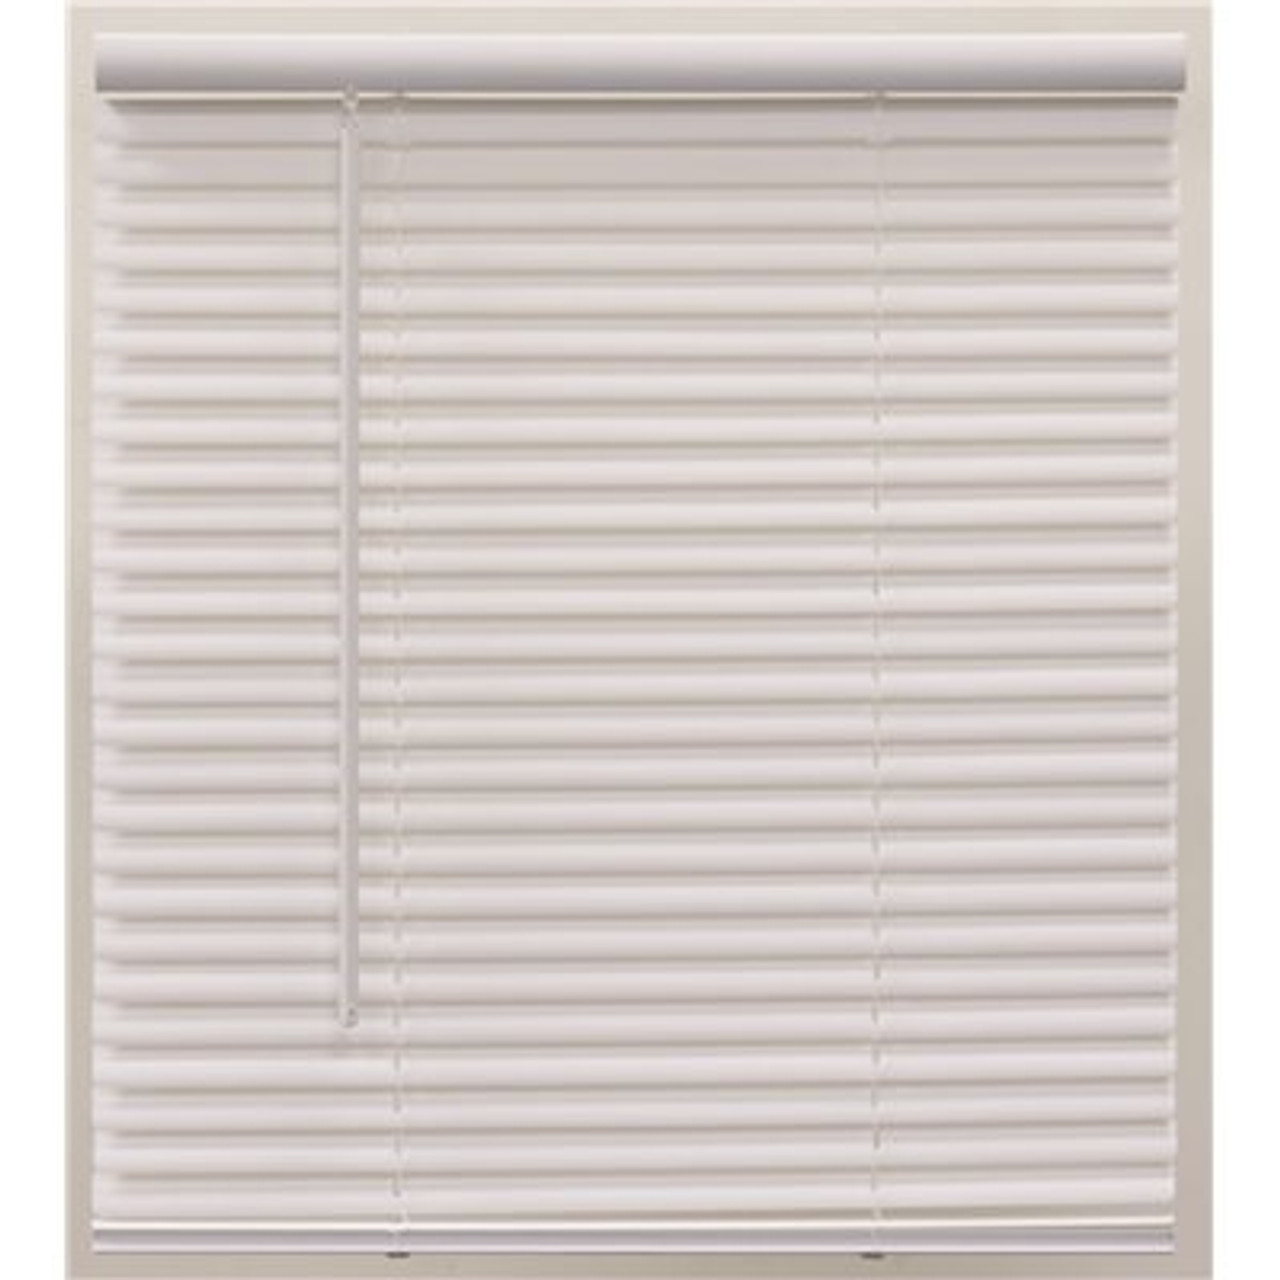 Champion Pre-Cut 45 in. W x 64 in. L Alabaster Cordless Light Filtering Vinyl Mini Blind with 1 in. Slats